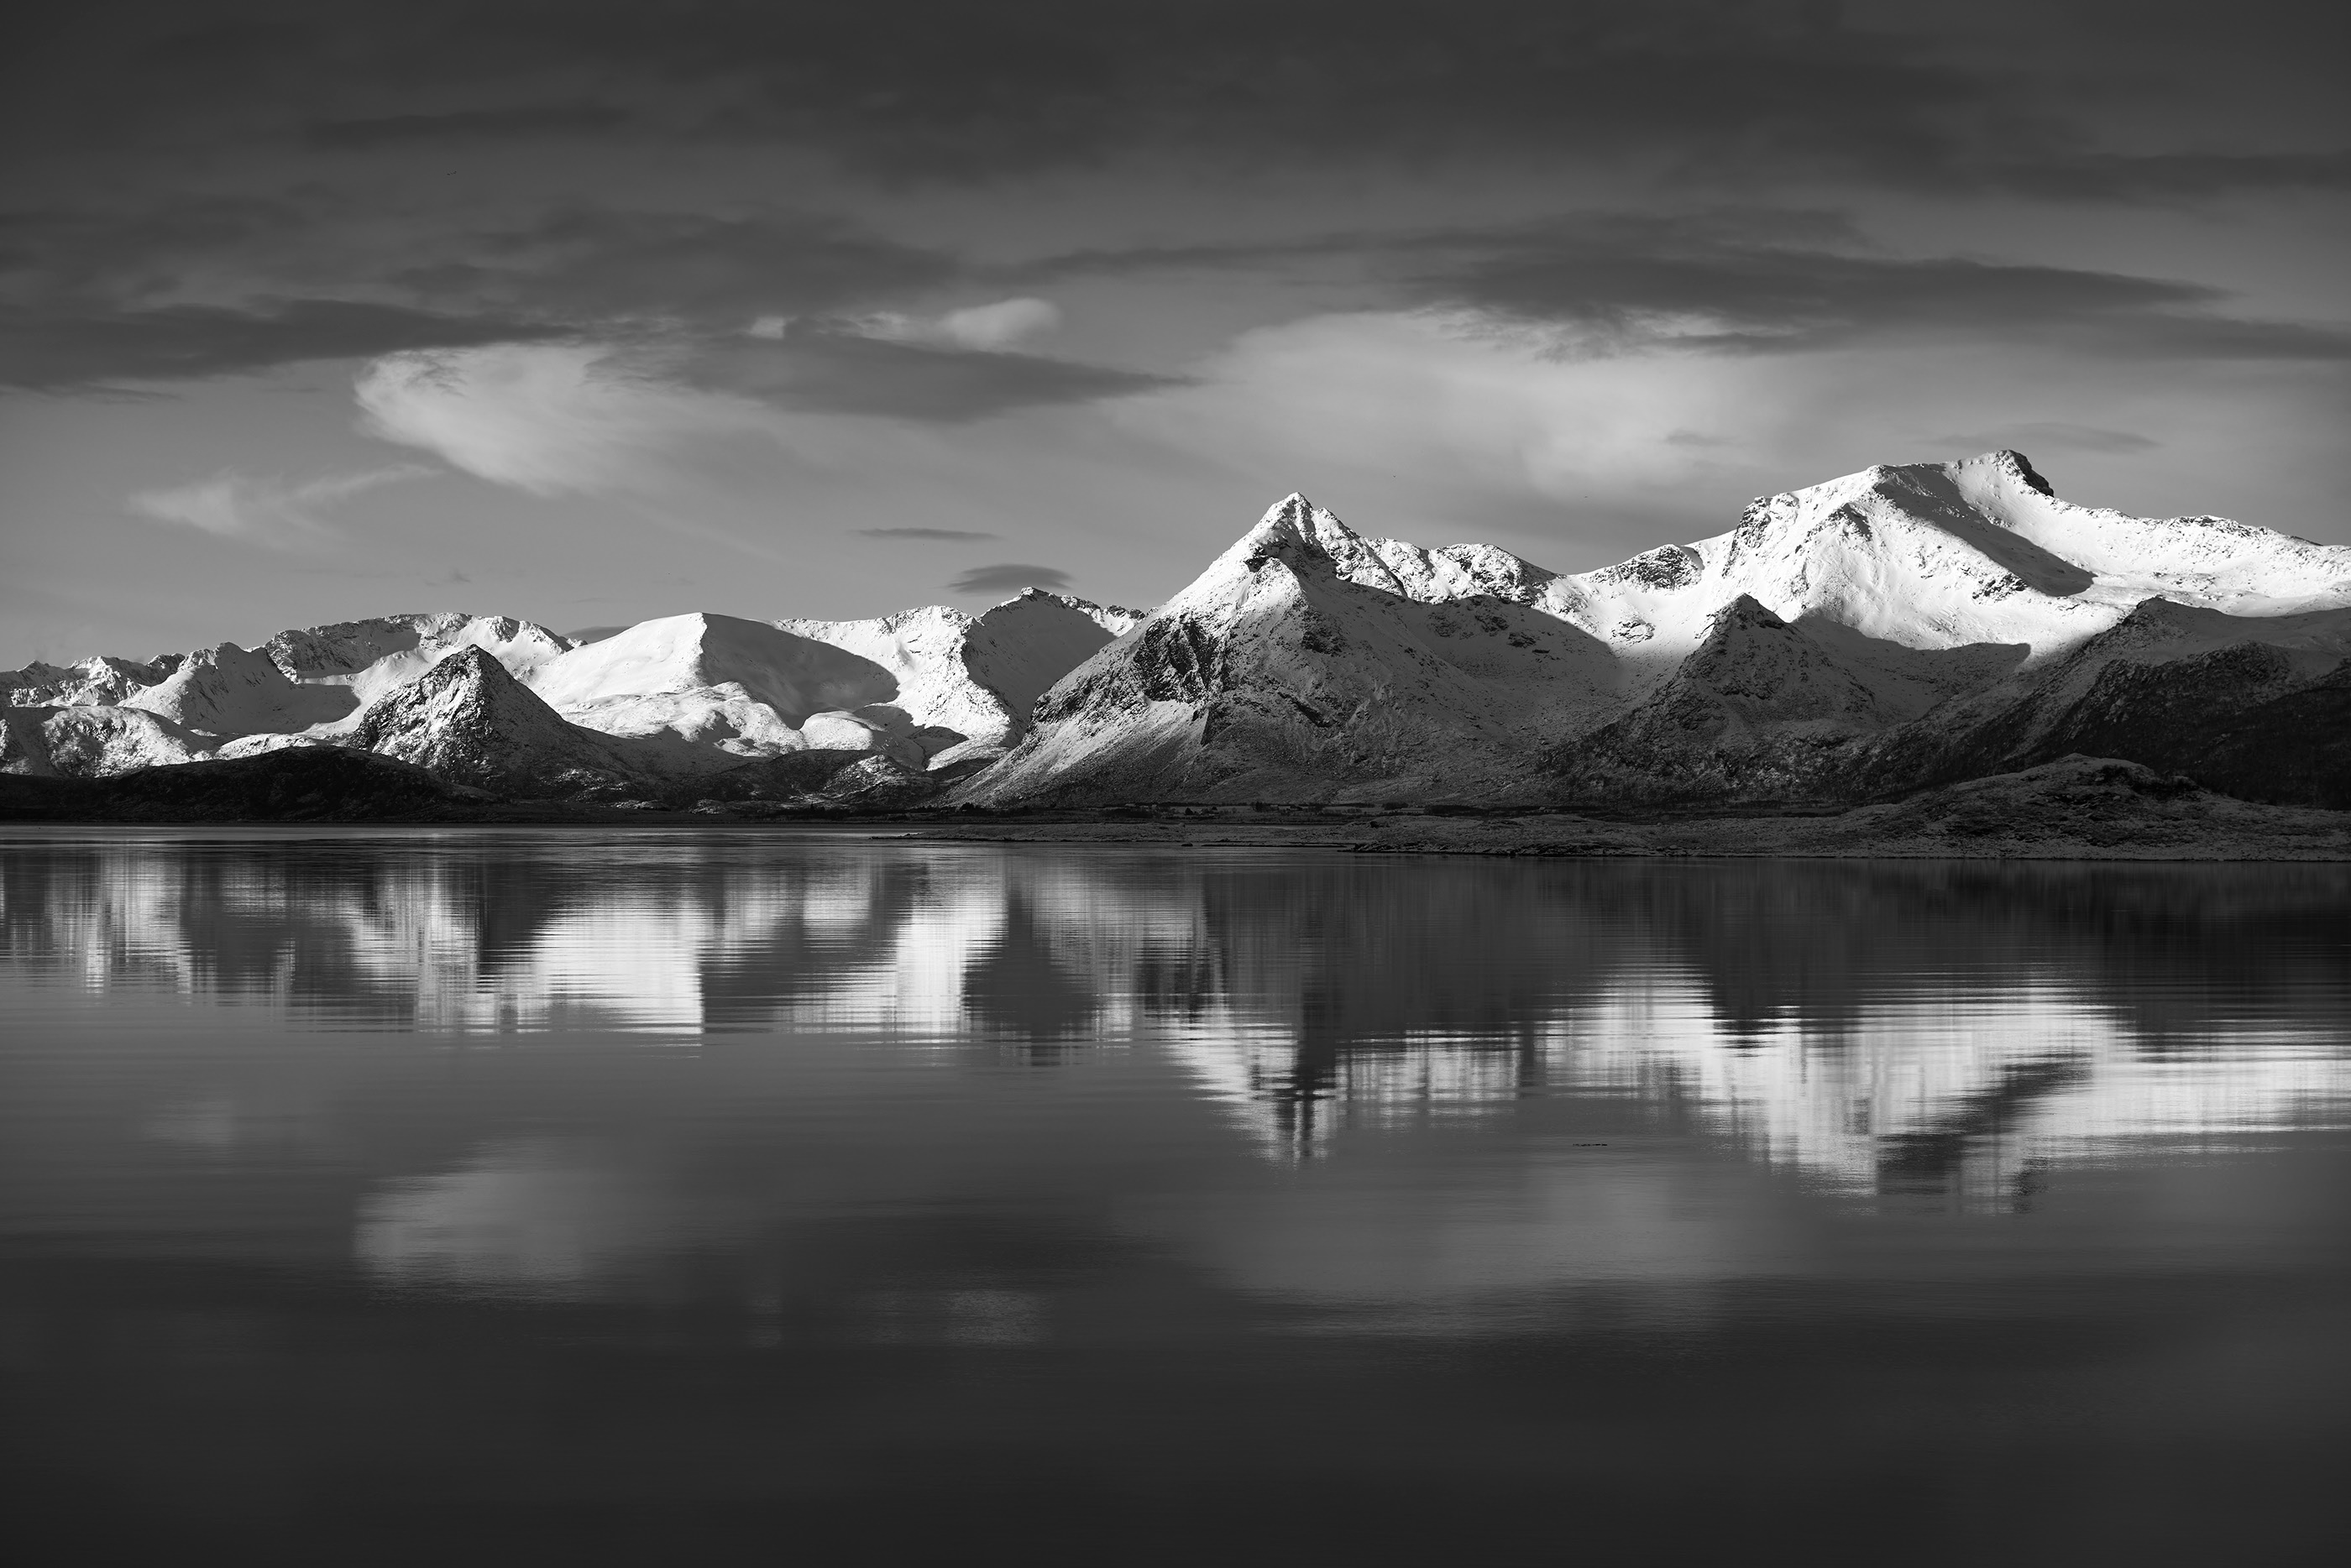 General 2800x1868 photography landscape monochrome mountains lake snow reflection water clouds sky nature